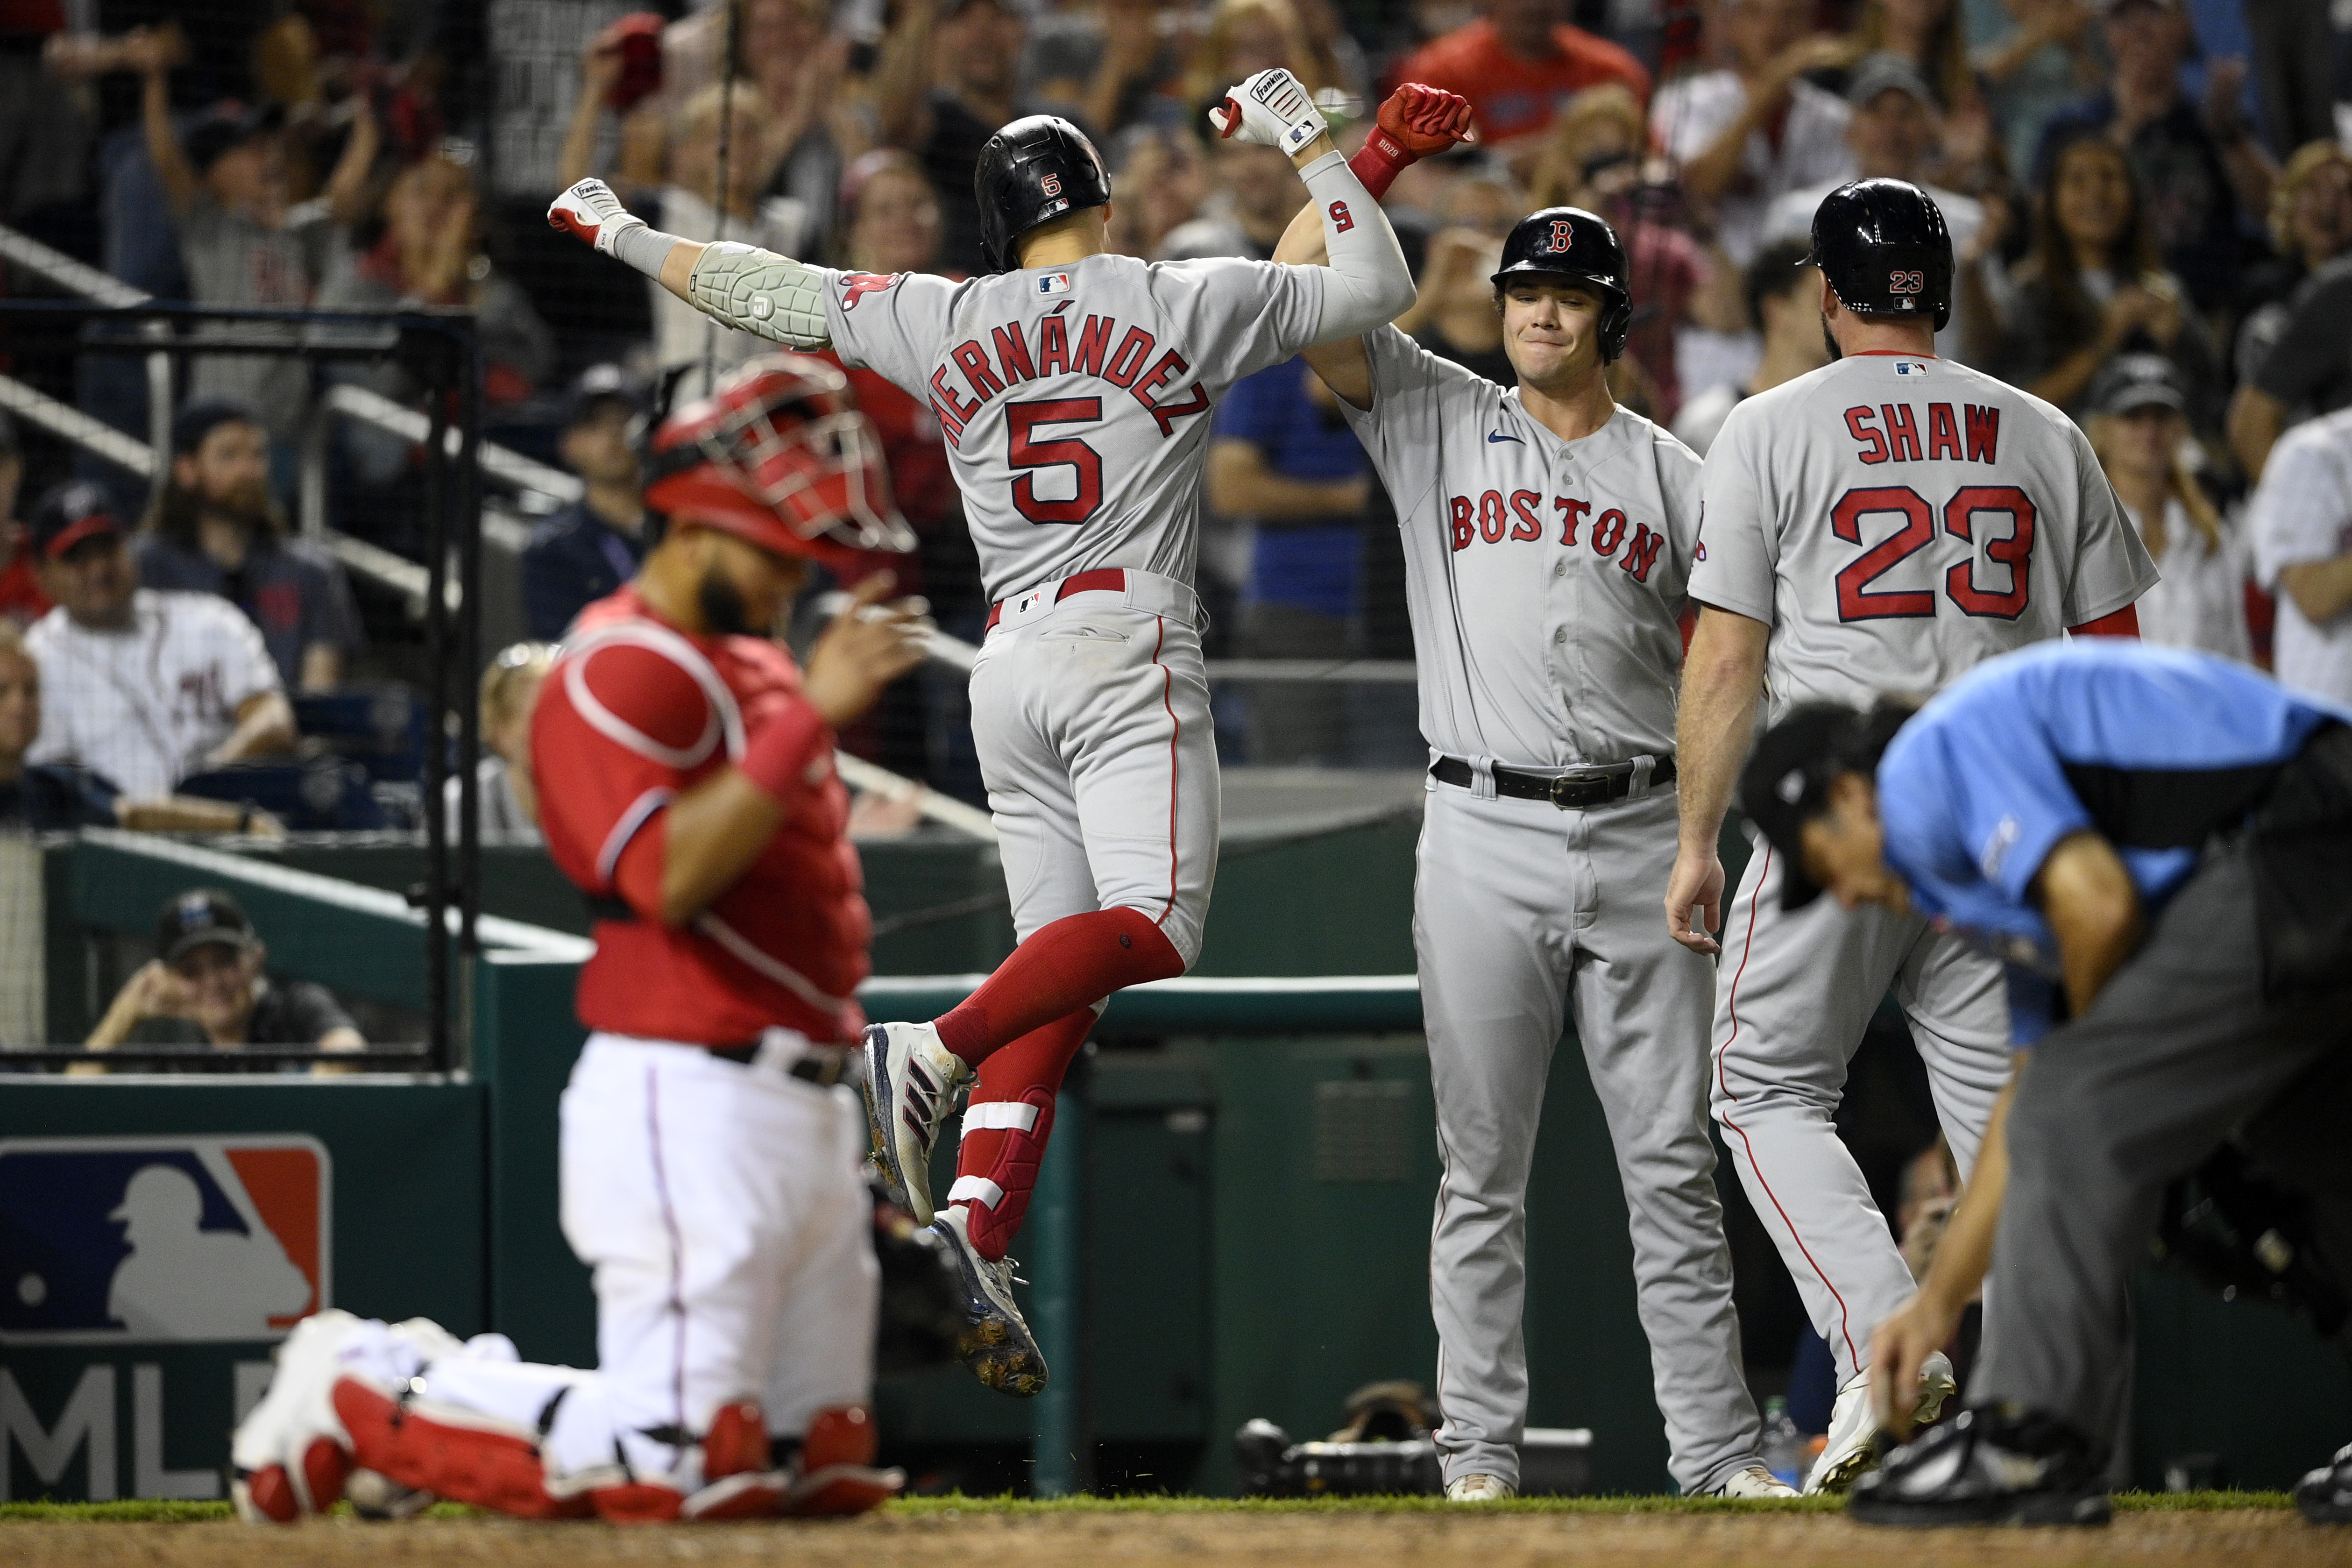 Red Sox Wild Card odds: Breaking down how Boston can make a run at